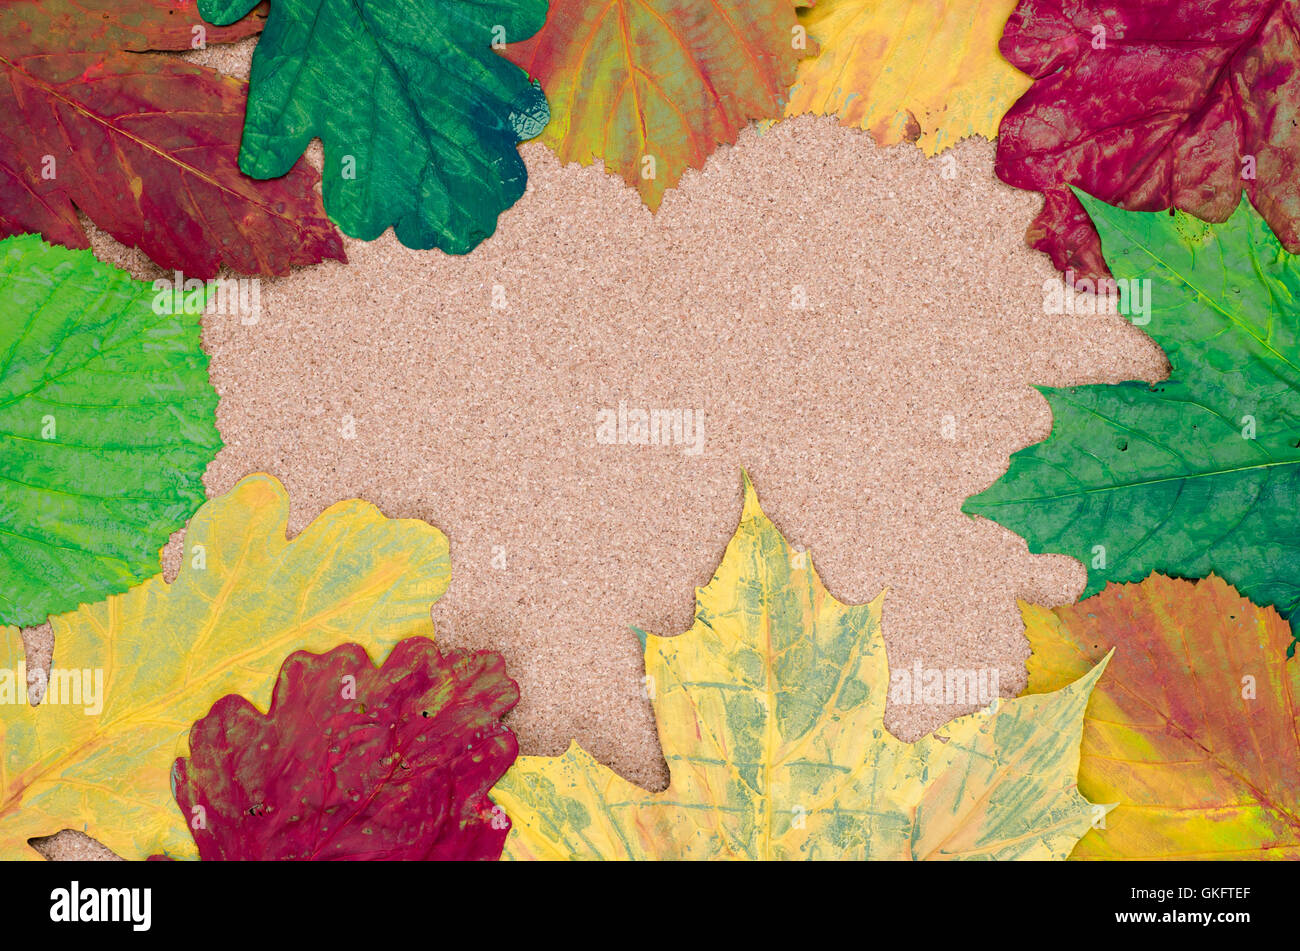 multicolored painted fall leaves composition Stock Photo